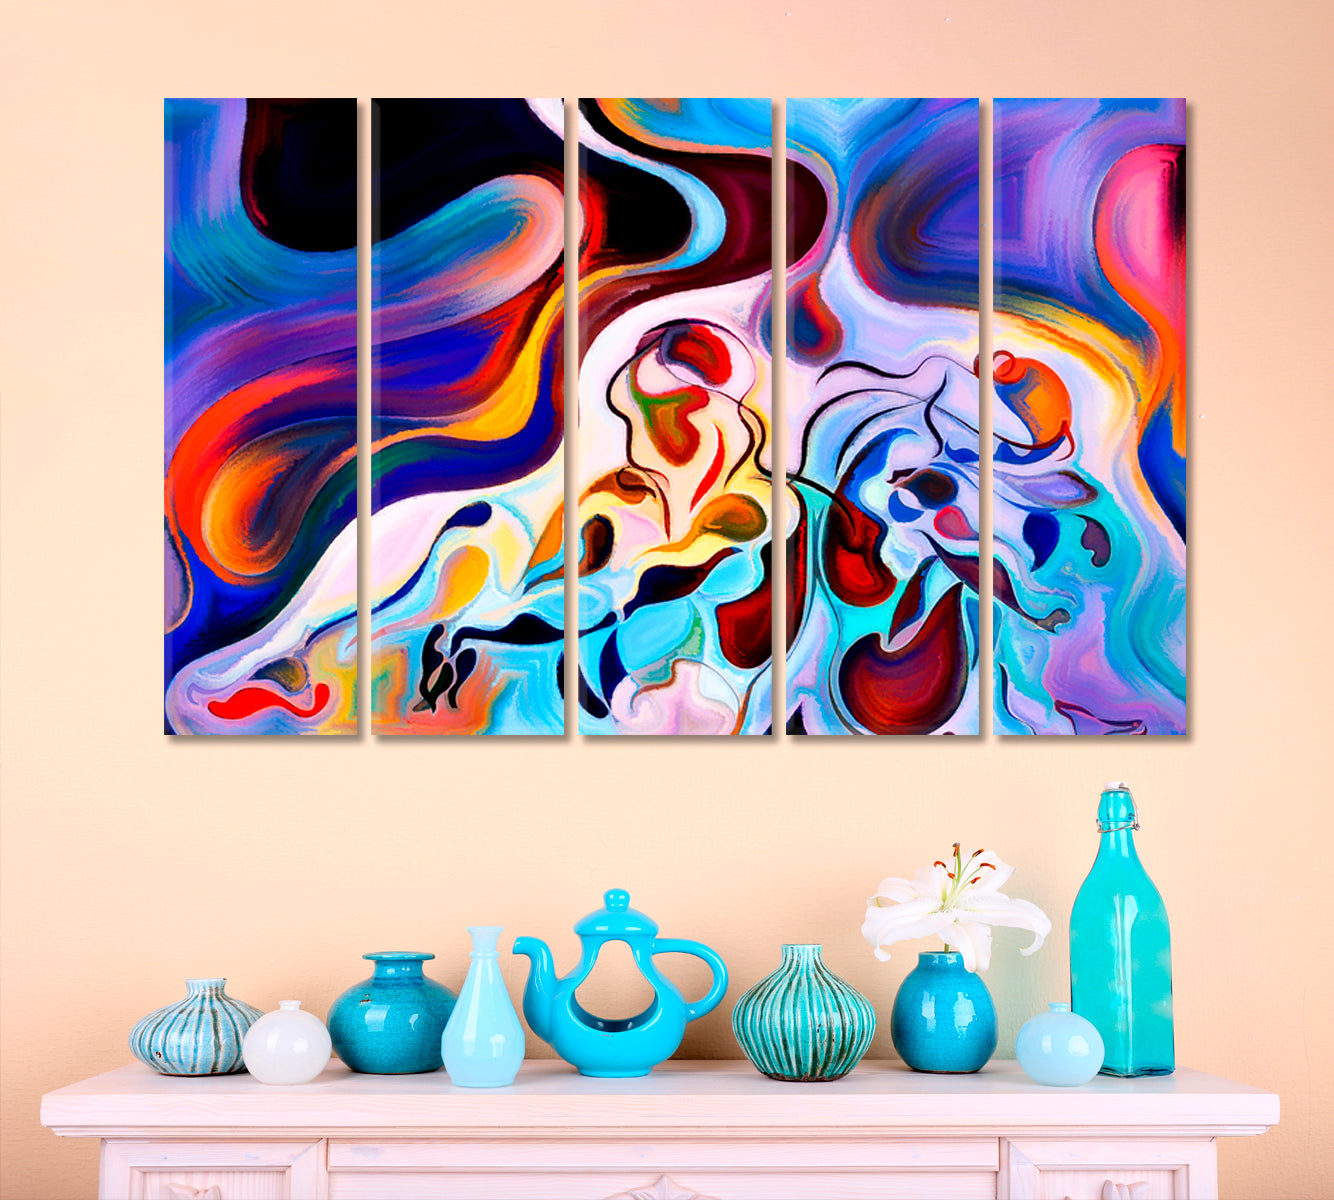 People And Bright Forms Abstract Art Print Artesty 5 panels 36" x 24" 